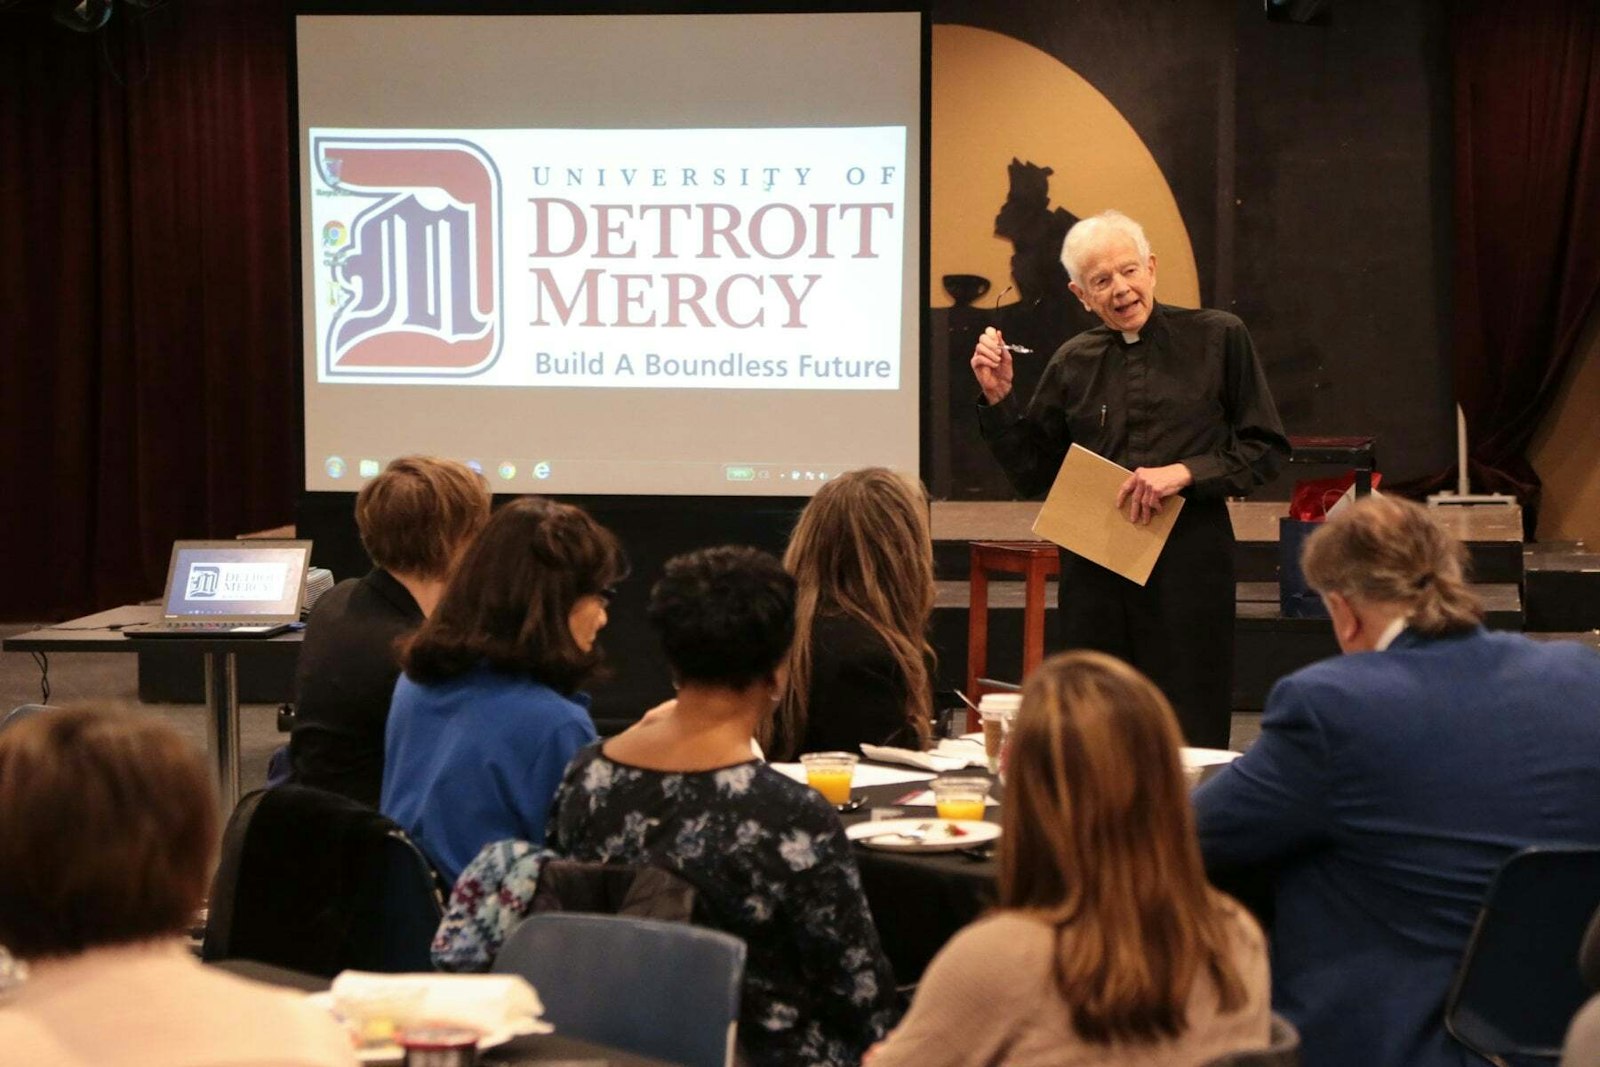 Fr. Gerald Cavanagh, SJ, gives a lecture at the University of Detroit Mercy in this file photo. His contributions to the field of business ethics include a focus on corporate social responsibility, a concept that was almost unheard of when Fr. Cavanagh started in the field more than 50 years ago. (Courtesy of the University of Detroit Mercy)